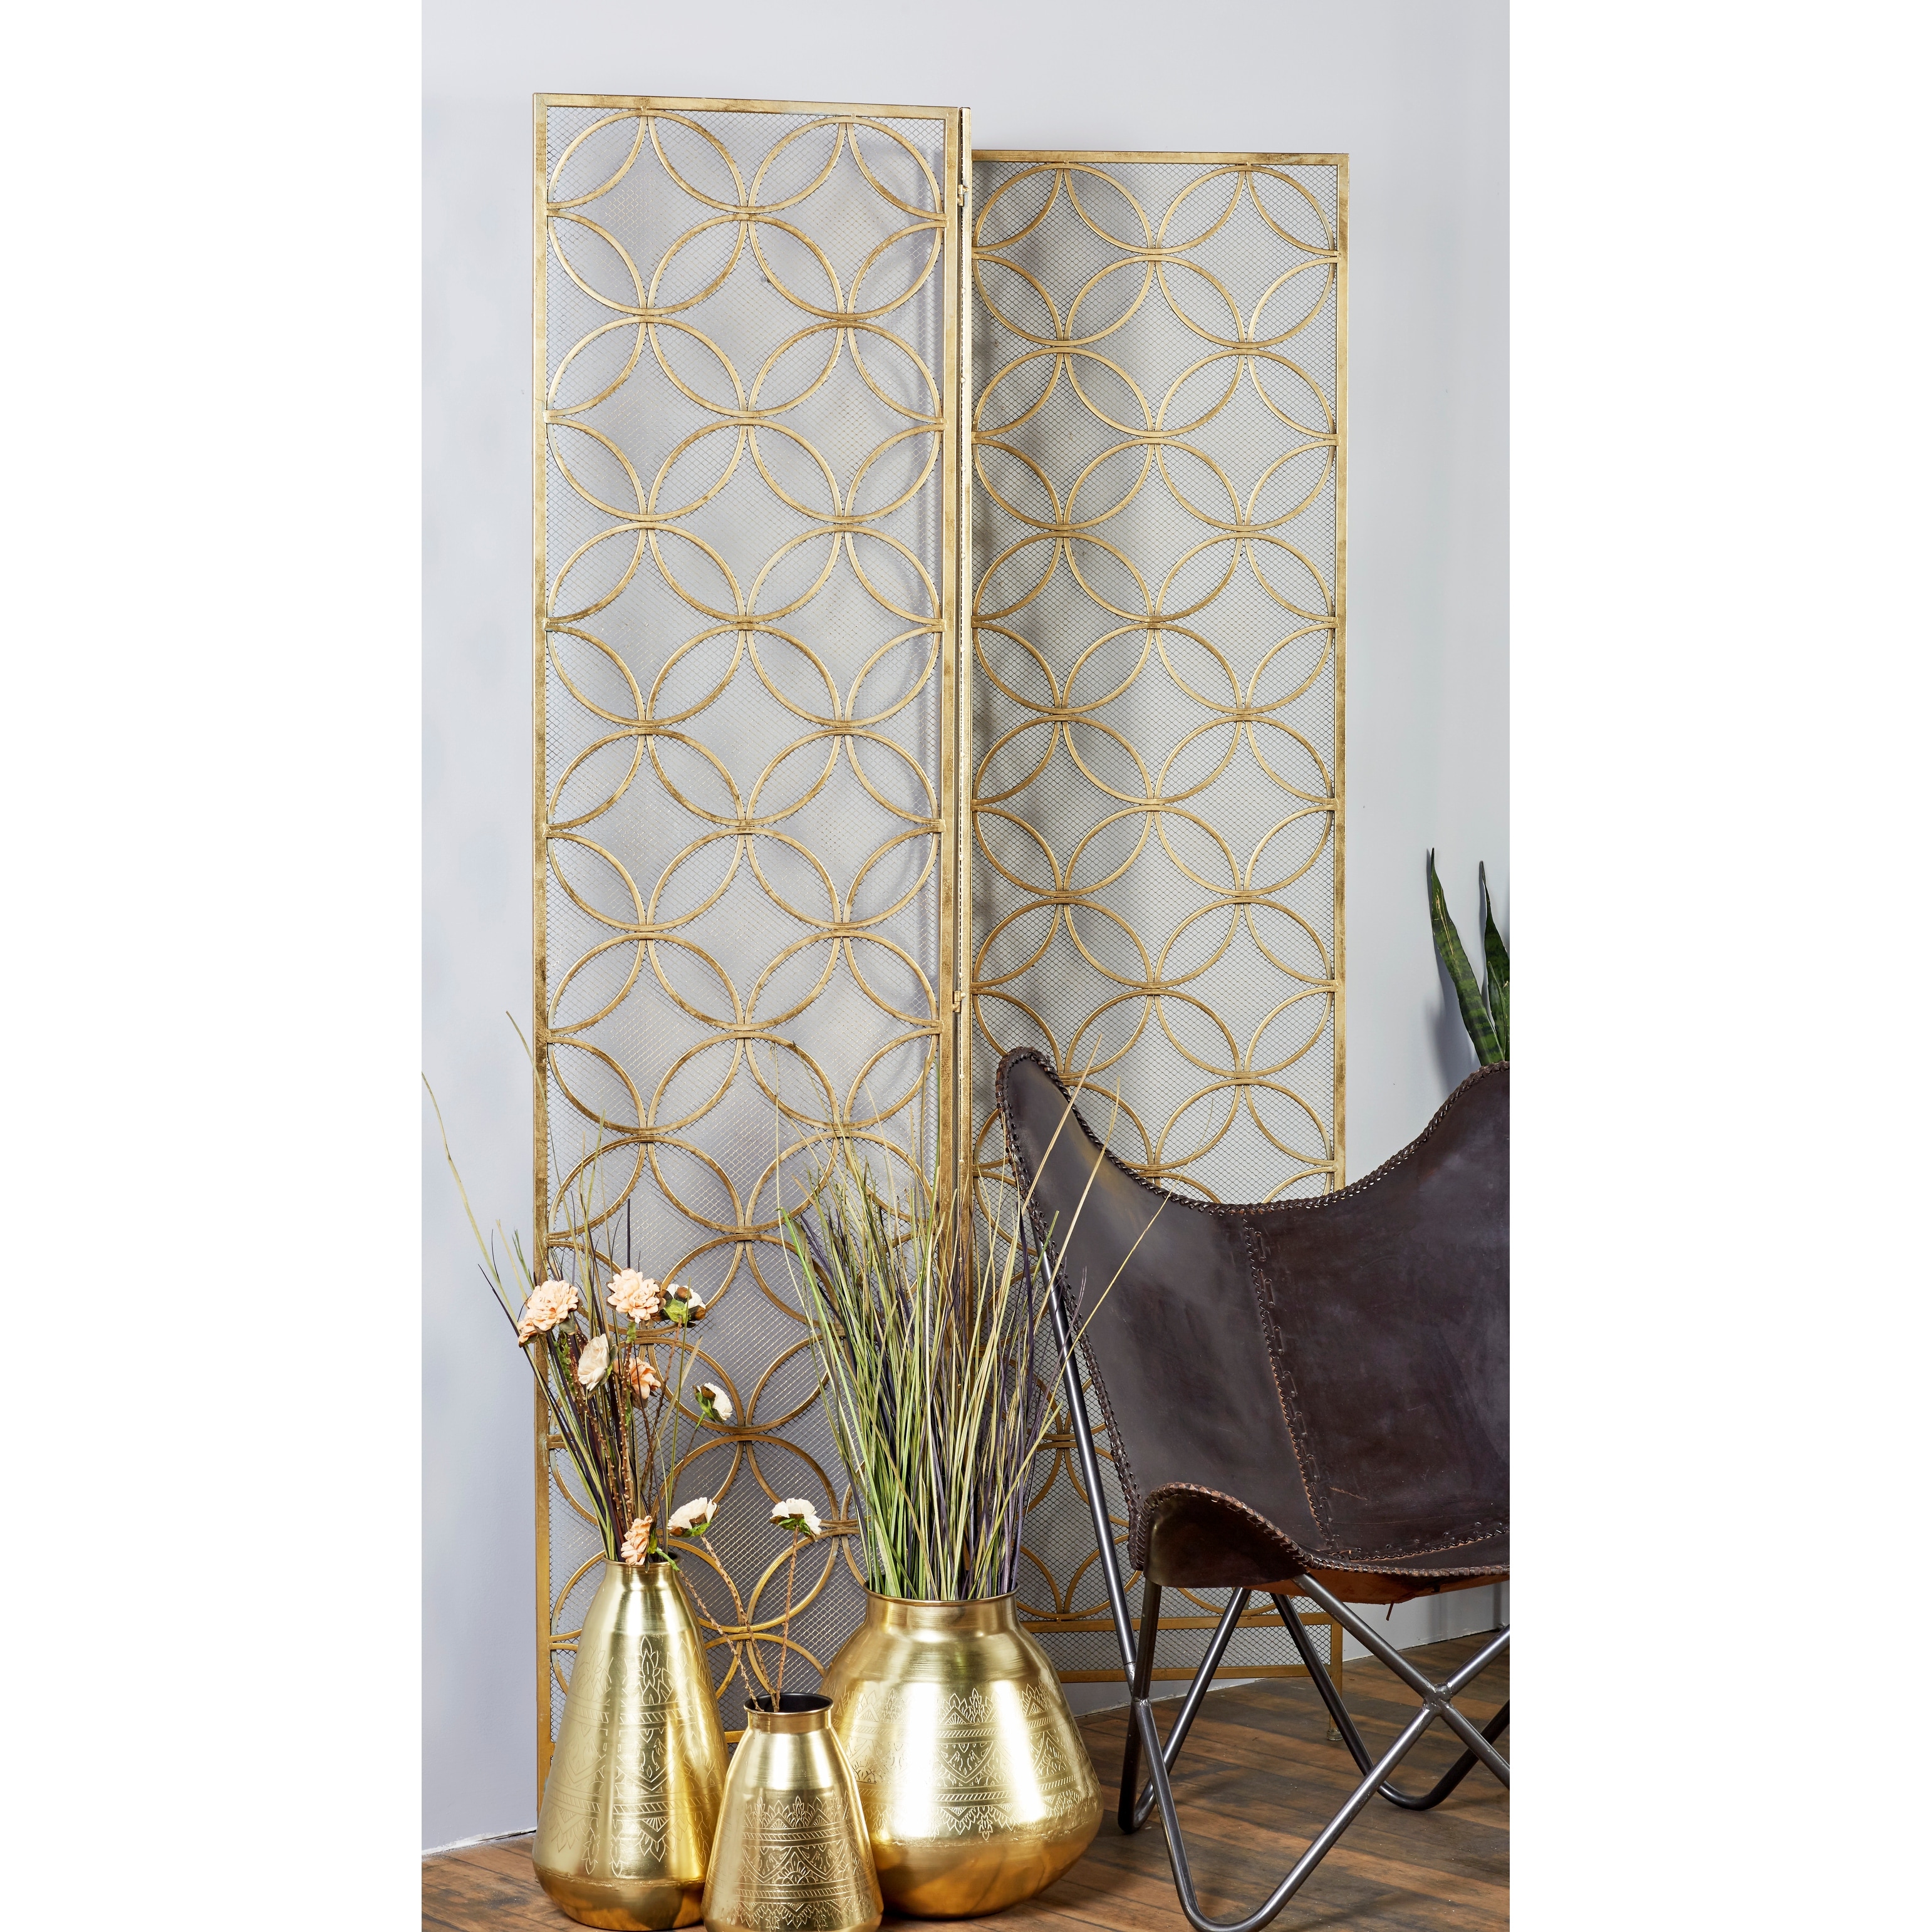 https://ak1.ostkcdn.com/images/products/is/images/direct/f83a949b90d09fcbe2744264efa9a0c9b8e9c32e/Brass-Iron-Modern-Room-Divider-Screen-79-x-57-x-1.jpg